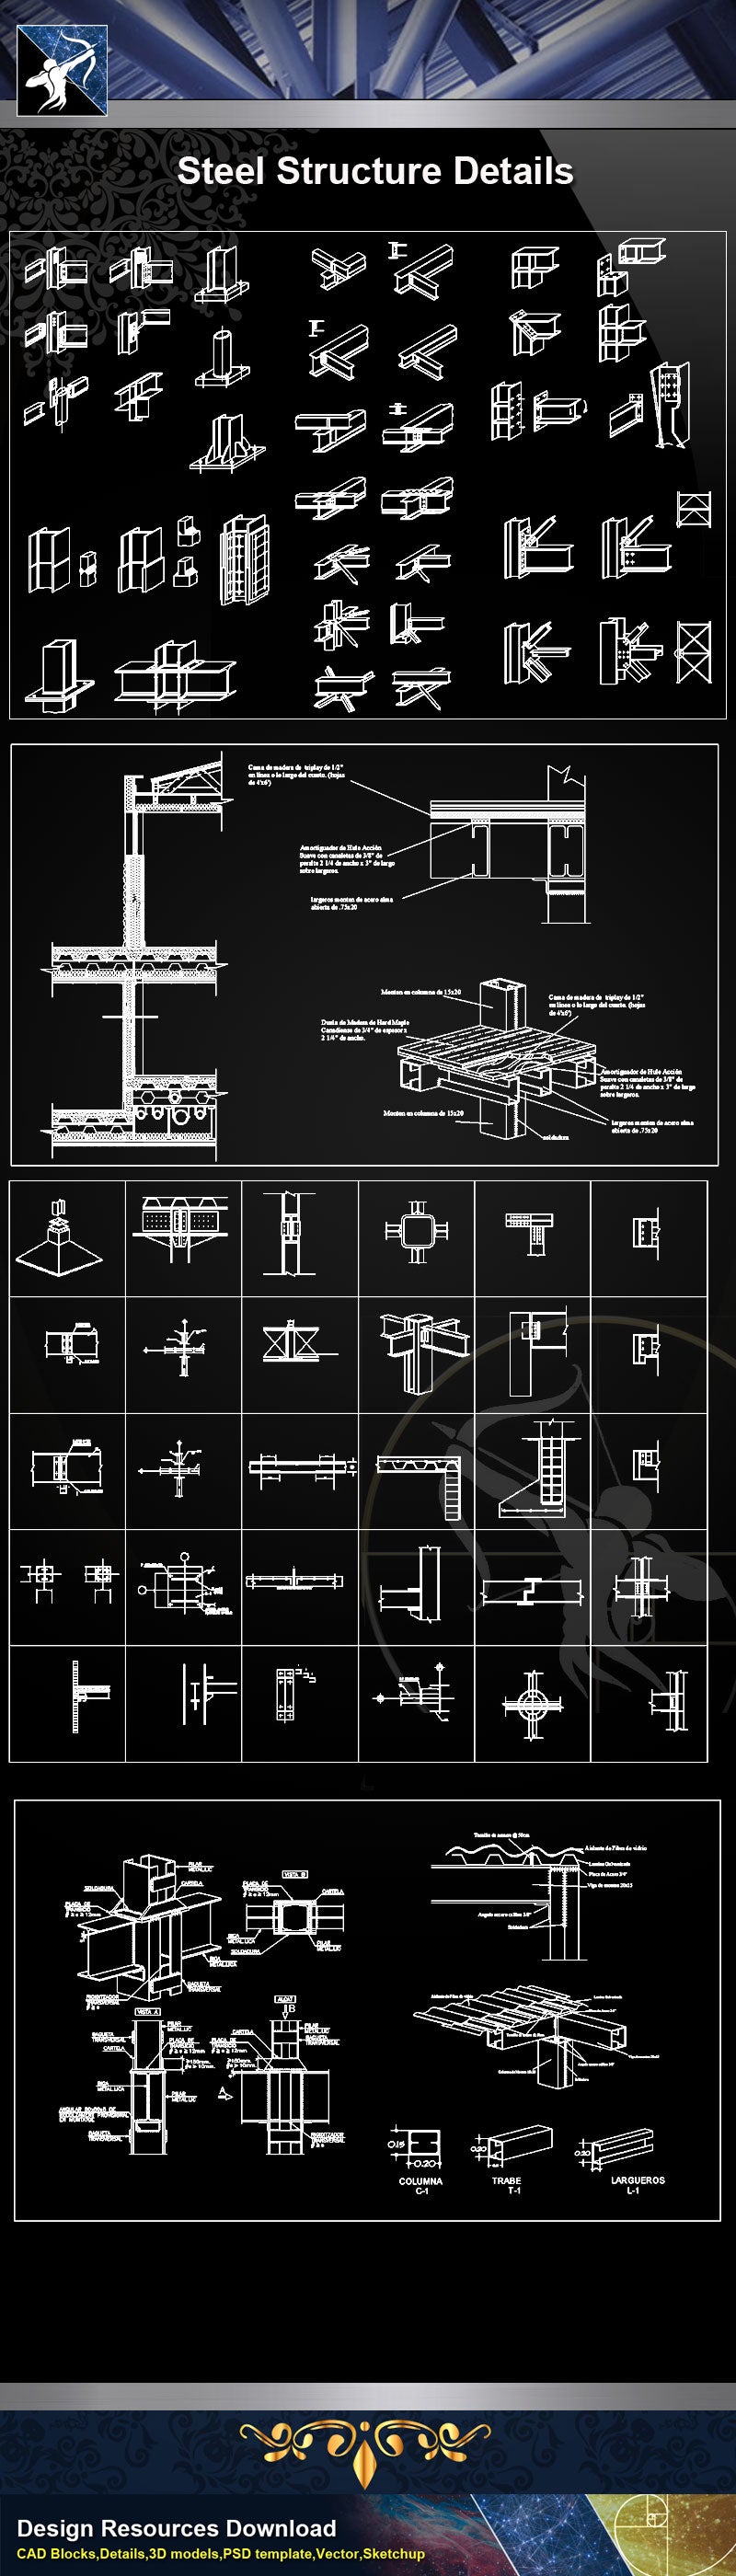 【Steel Structure Details】Steel Structure Details Collection V.3